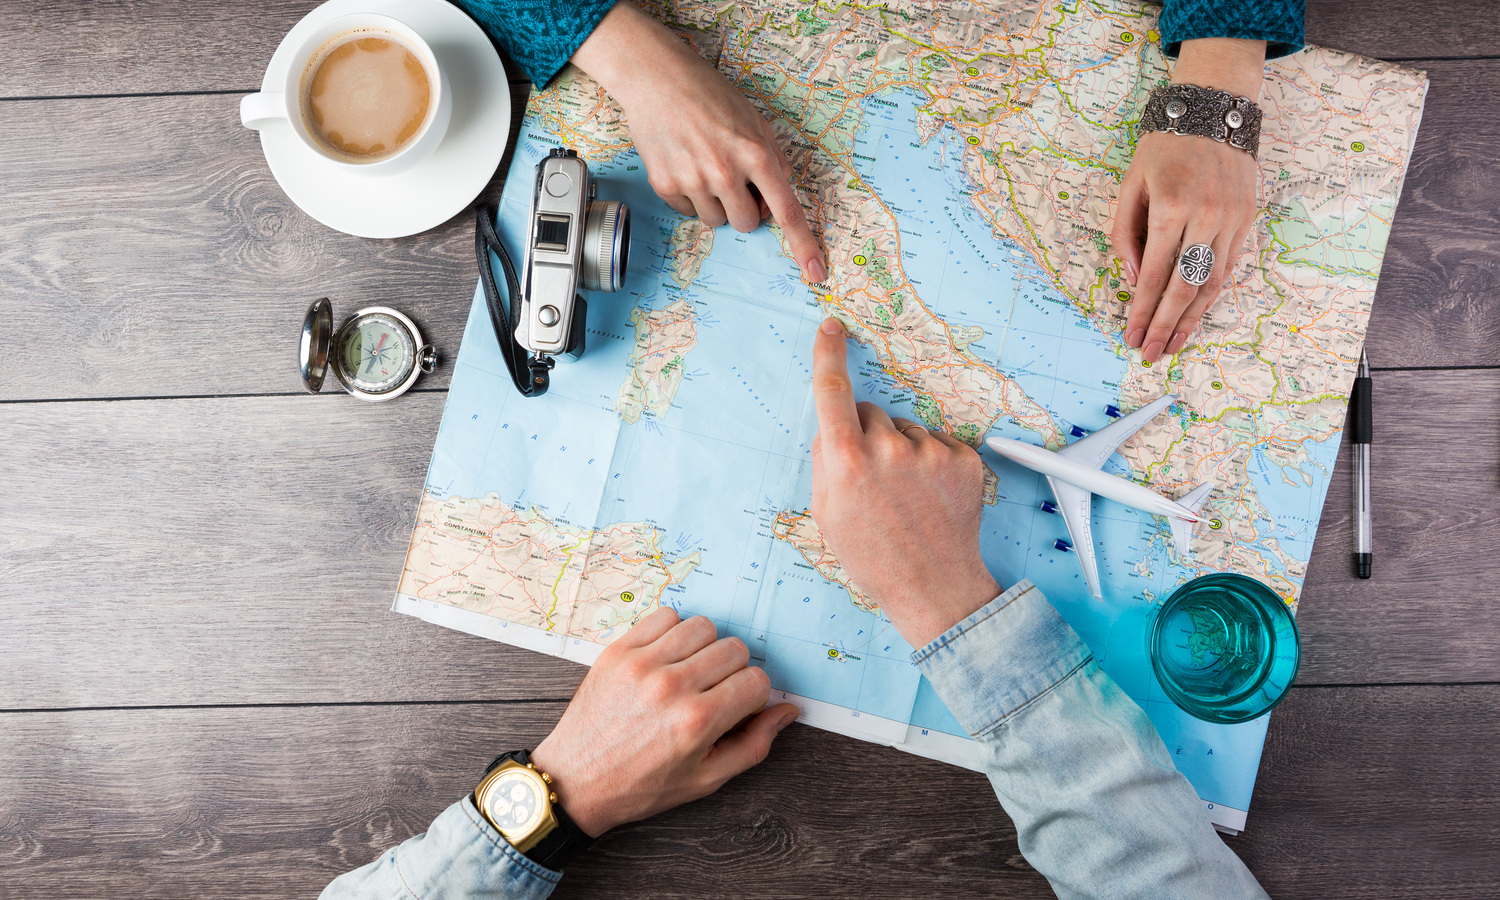 How will the travel industry be transformed by digital